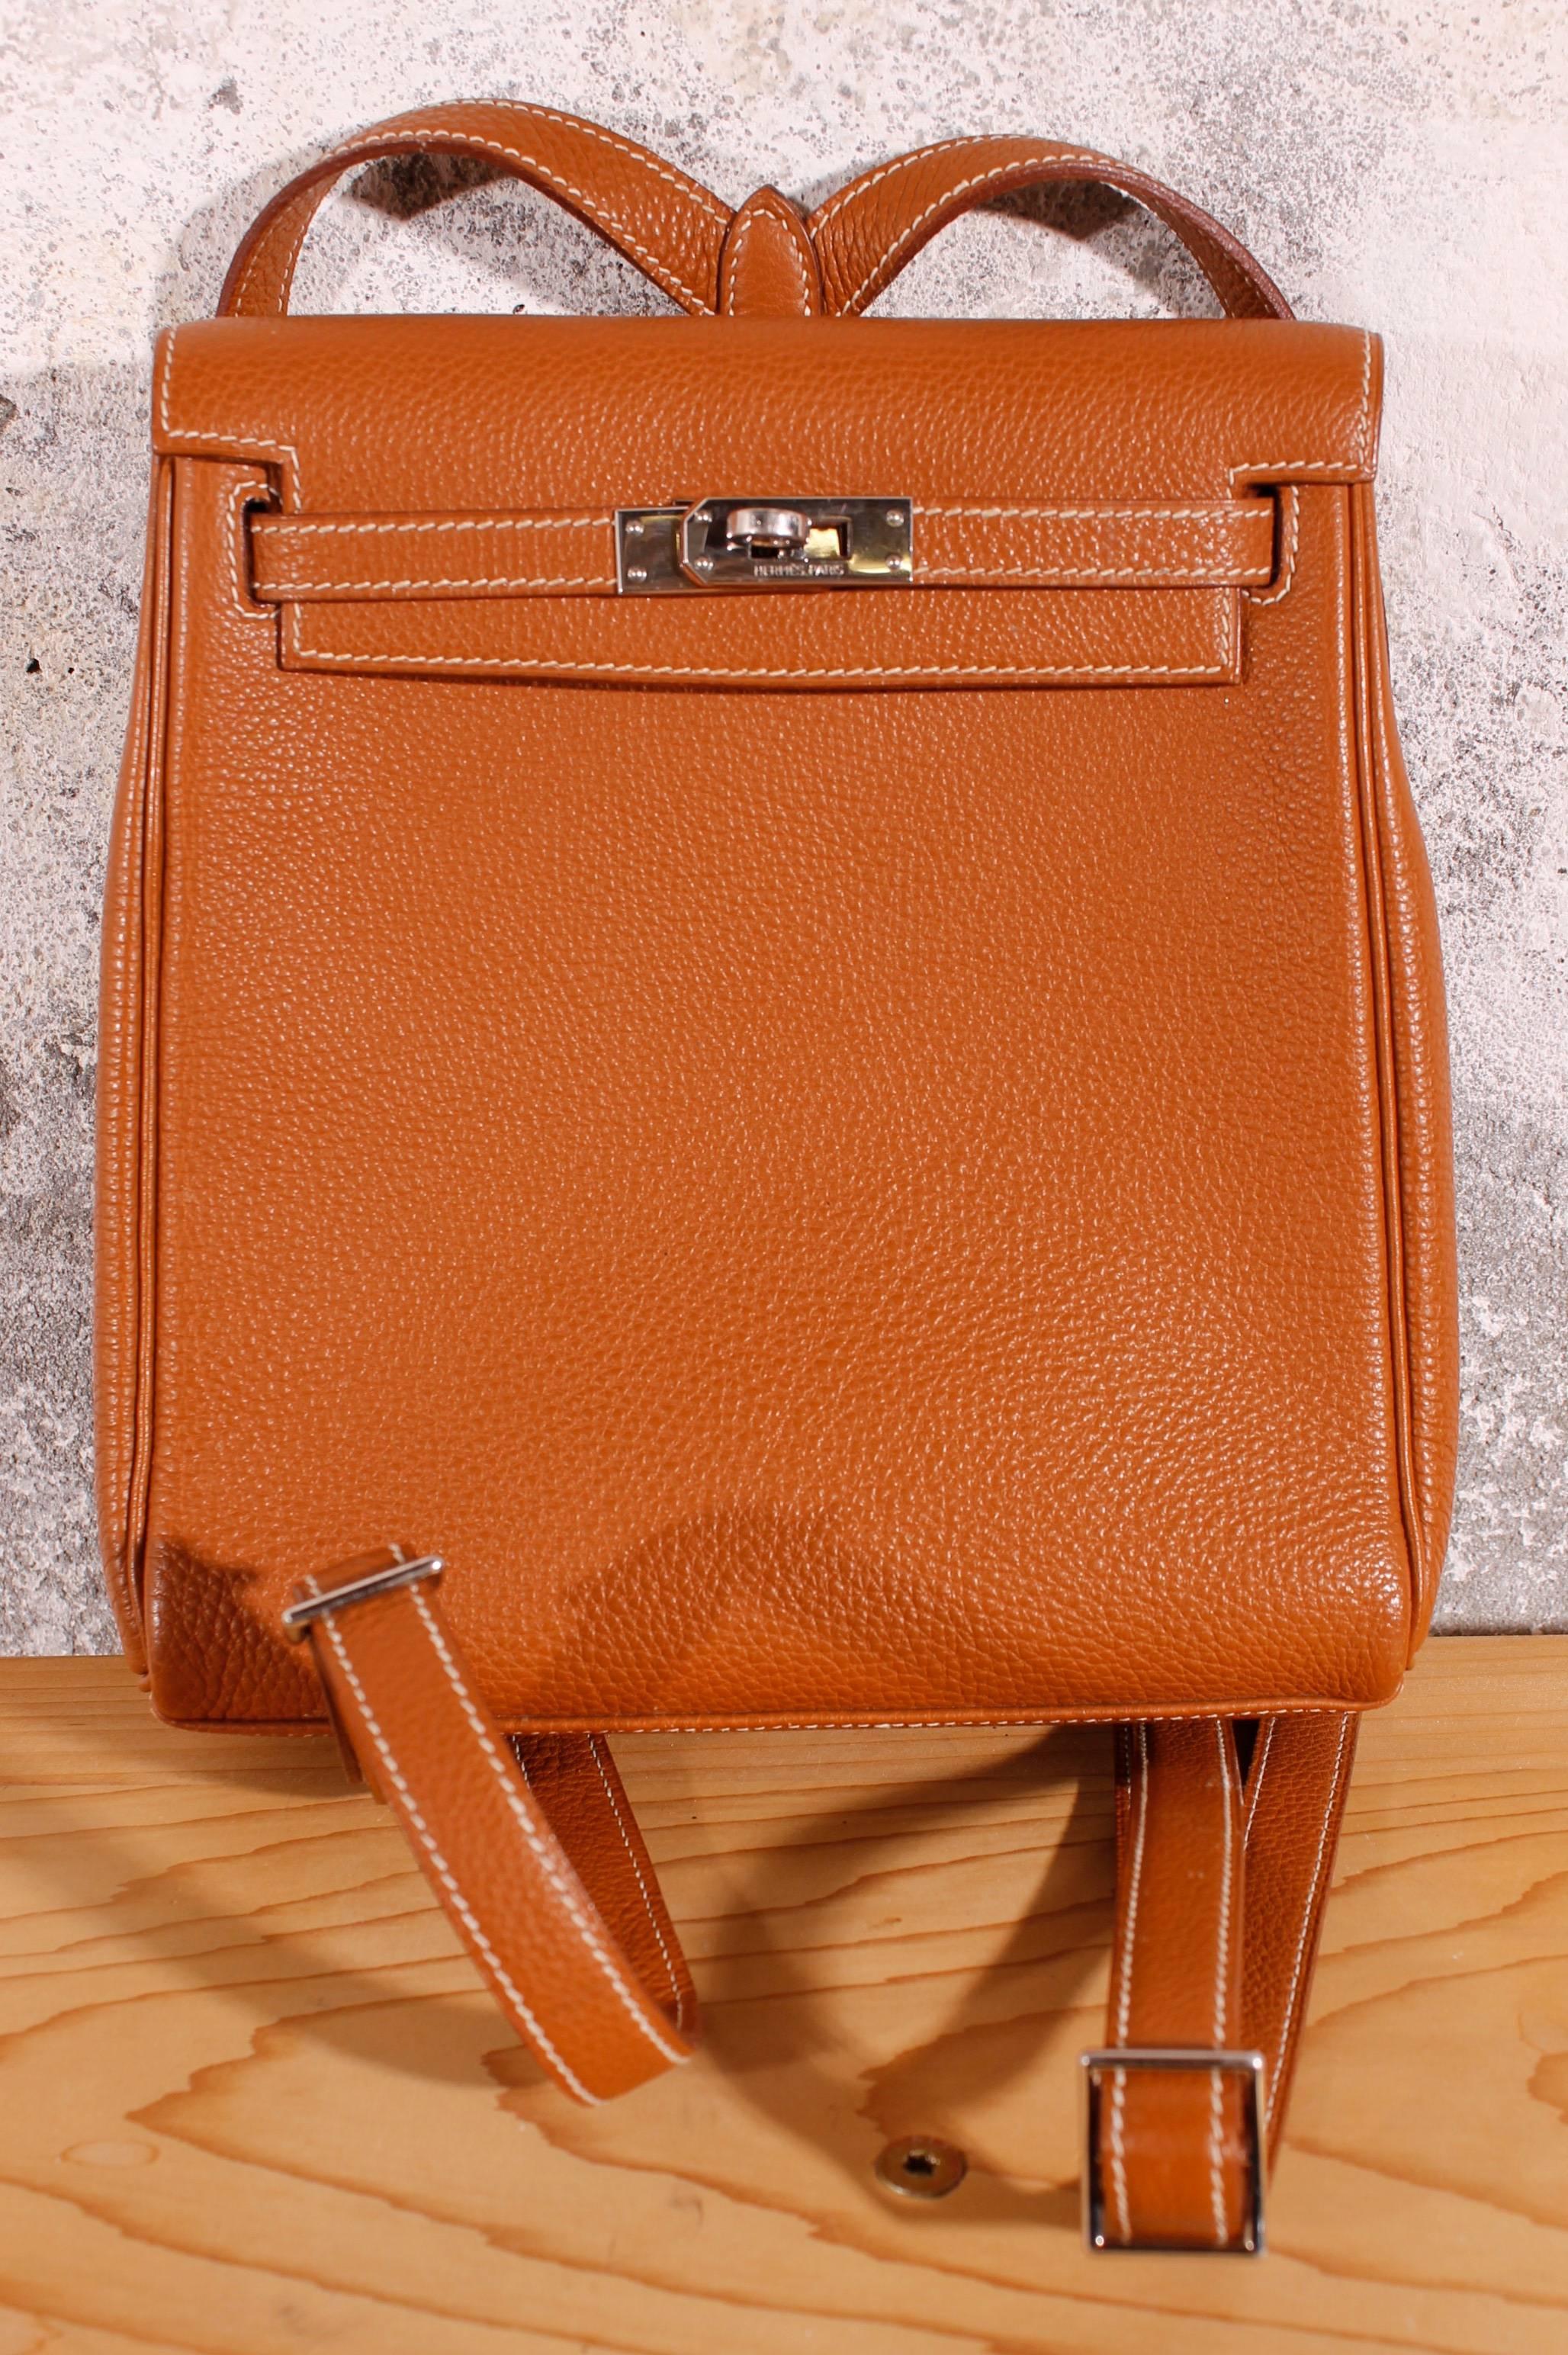 This Hermès backpack is a fun and functional spin off of the classic Kelly bag. The exterior is brown togo leather, which is slightly grained. The bag features a turnlock closure and two adjustable shoulder-straps. 
Interior is matching brown